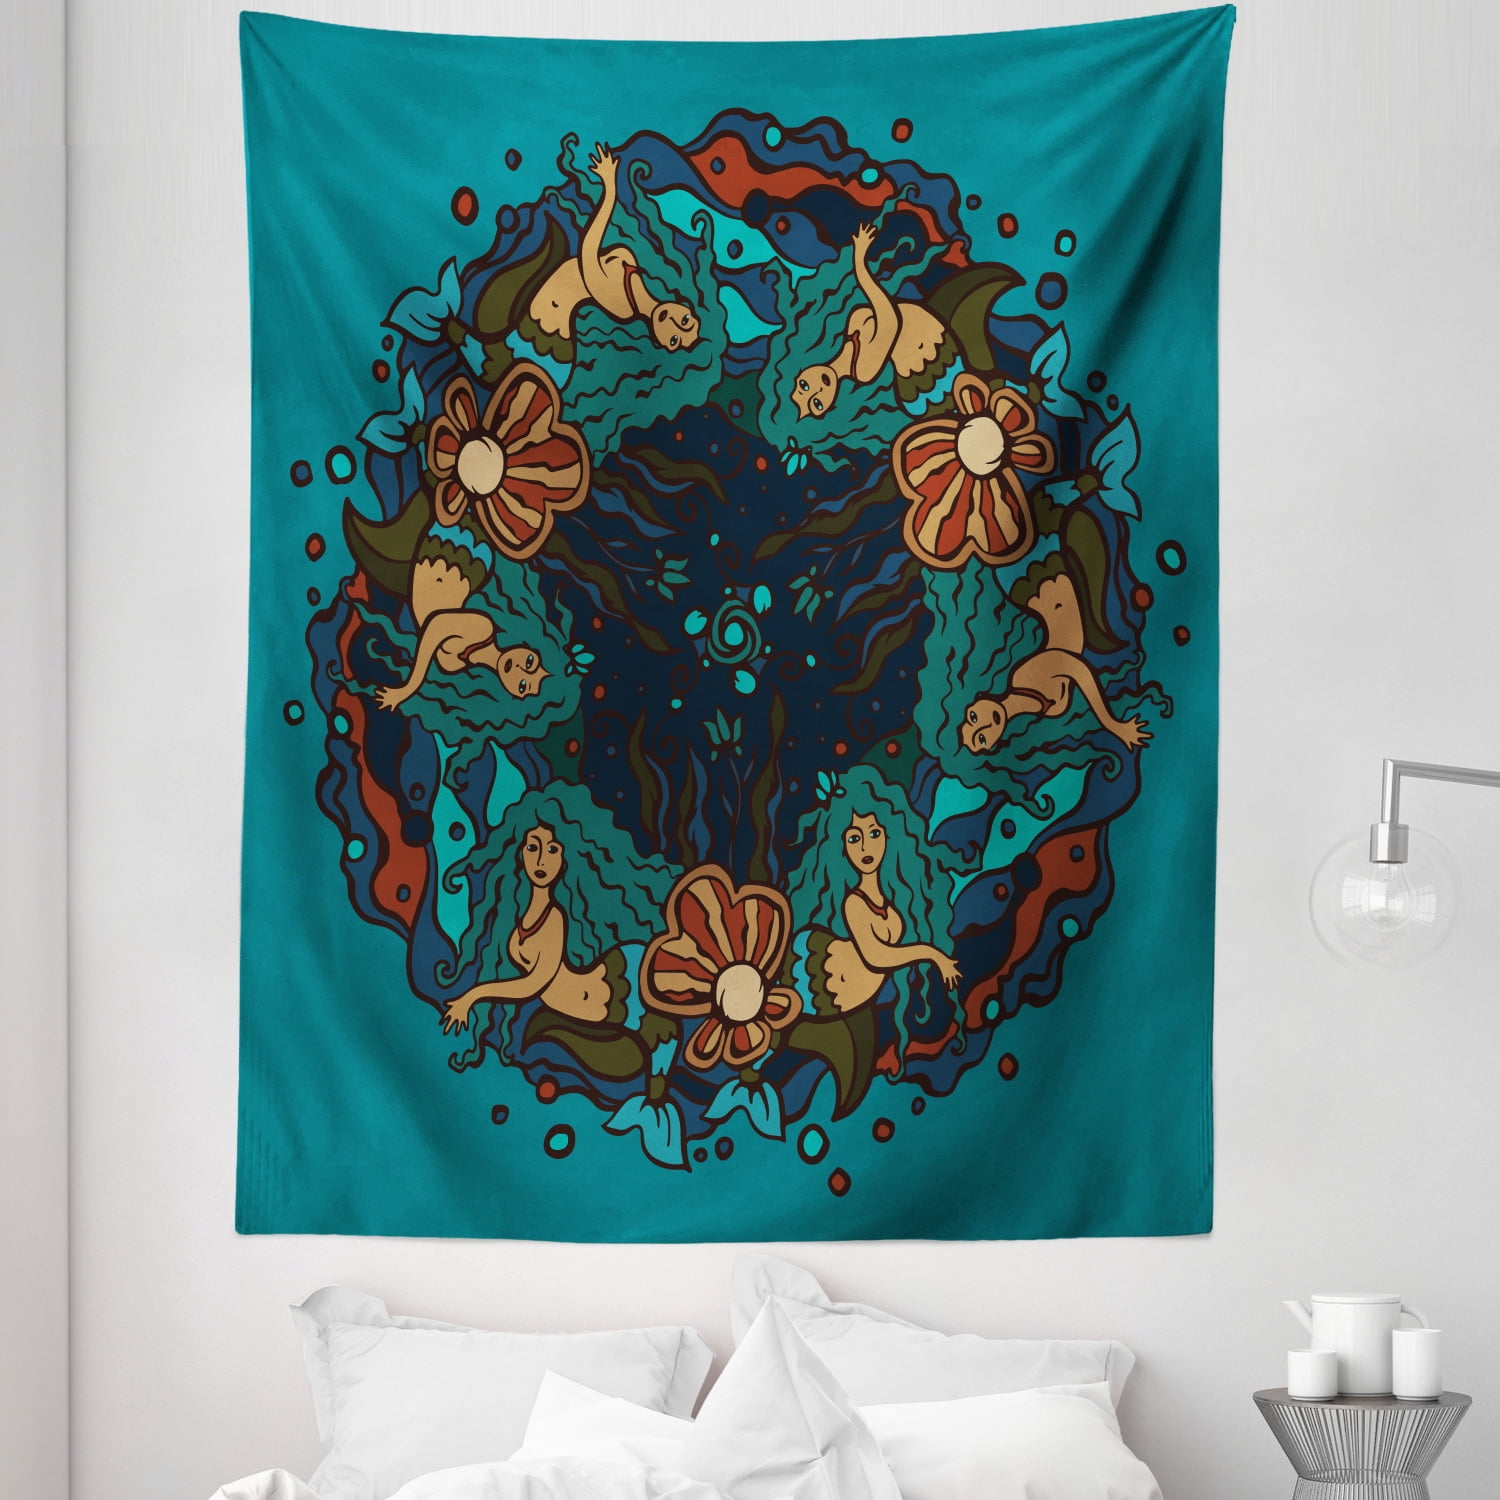 Blue Color Wall Hanging Cotton Mermaid Tapestry Poster Indian Table Cover Hippie 